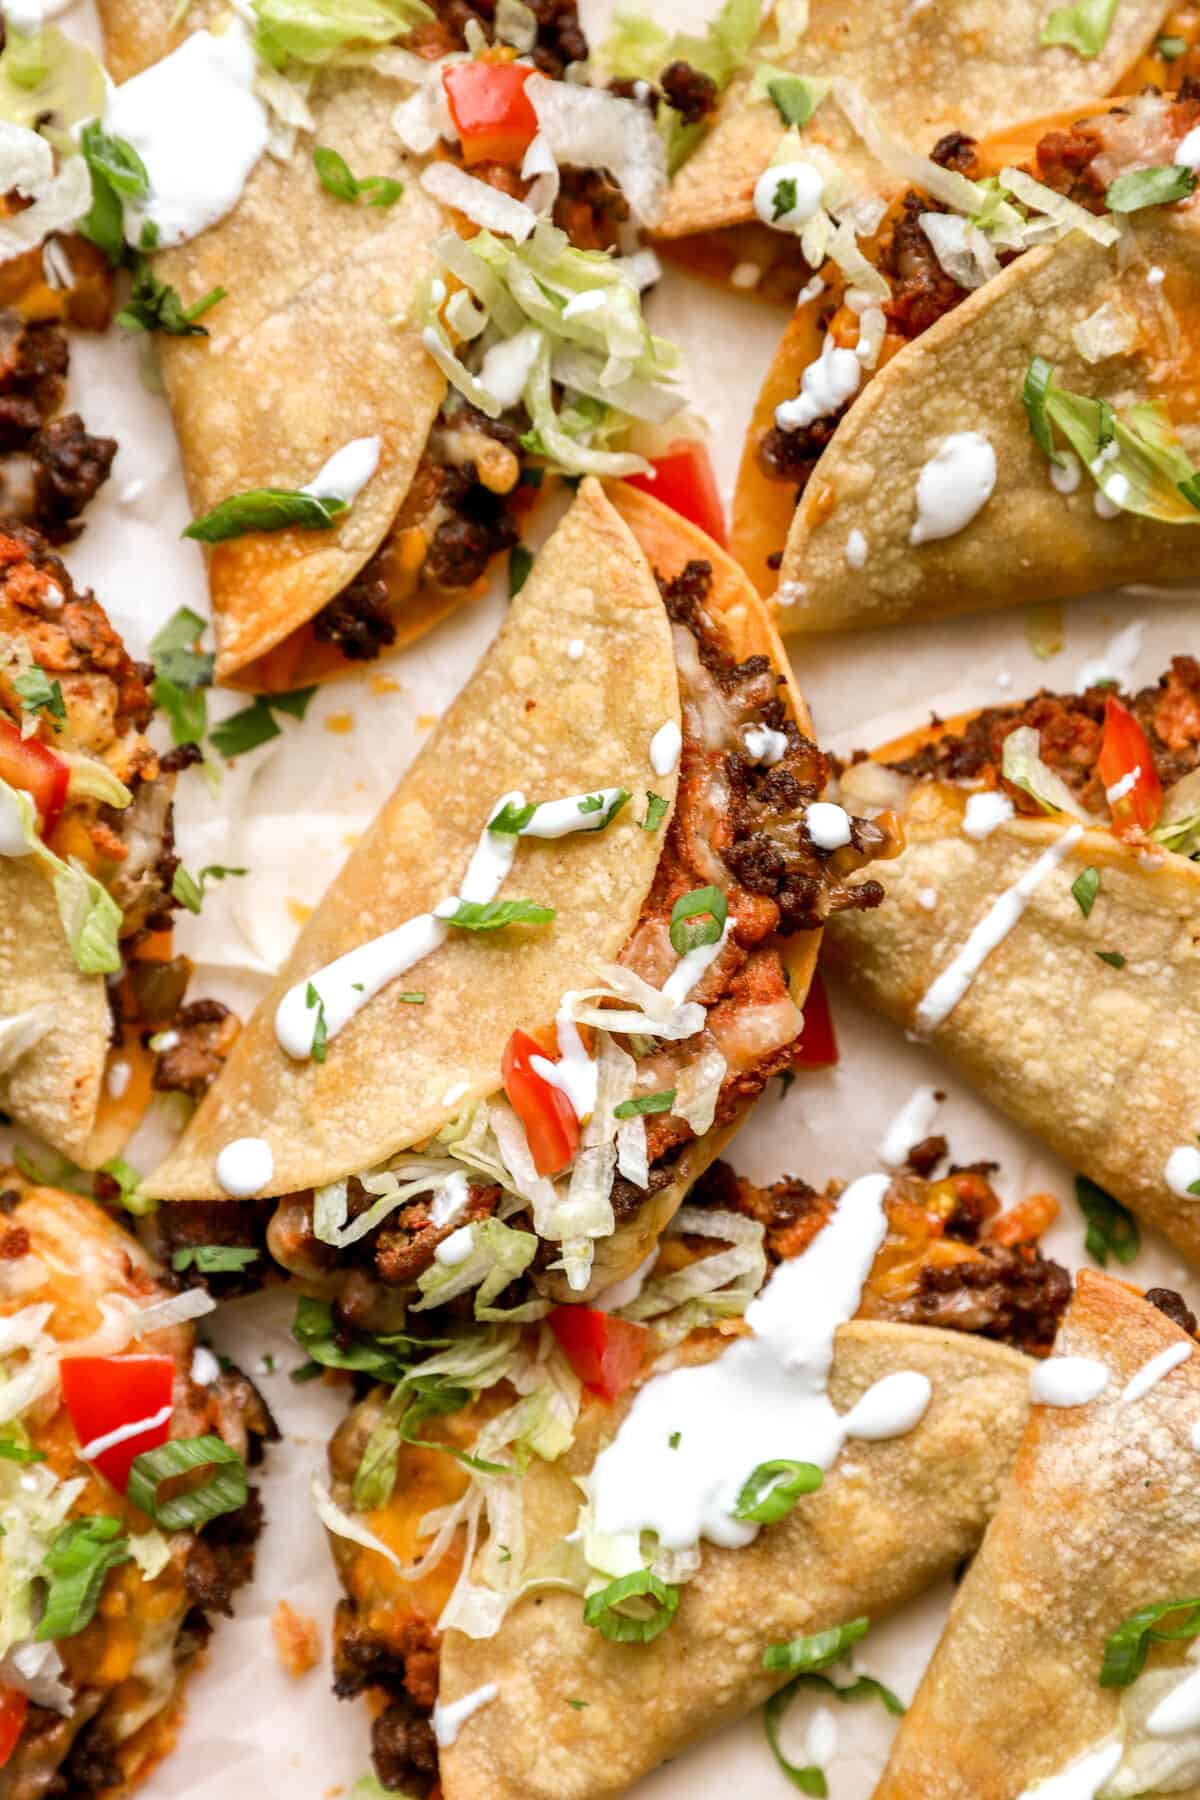 Close-up of assembled ground beef tacos, garnished with toppings.